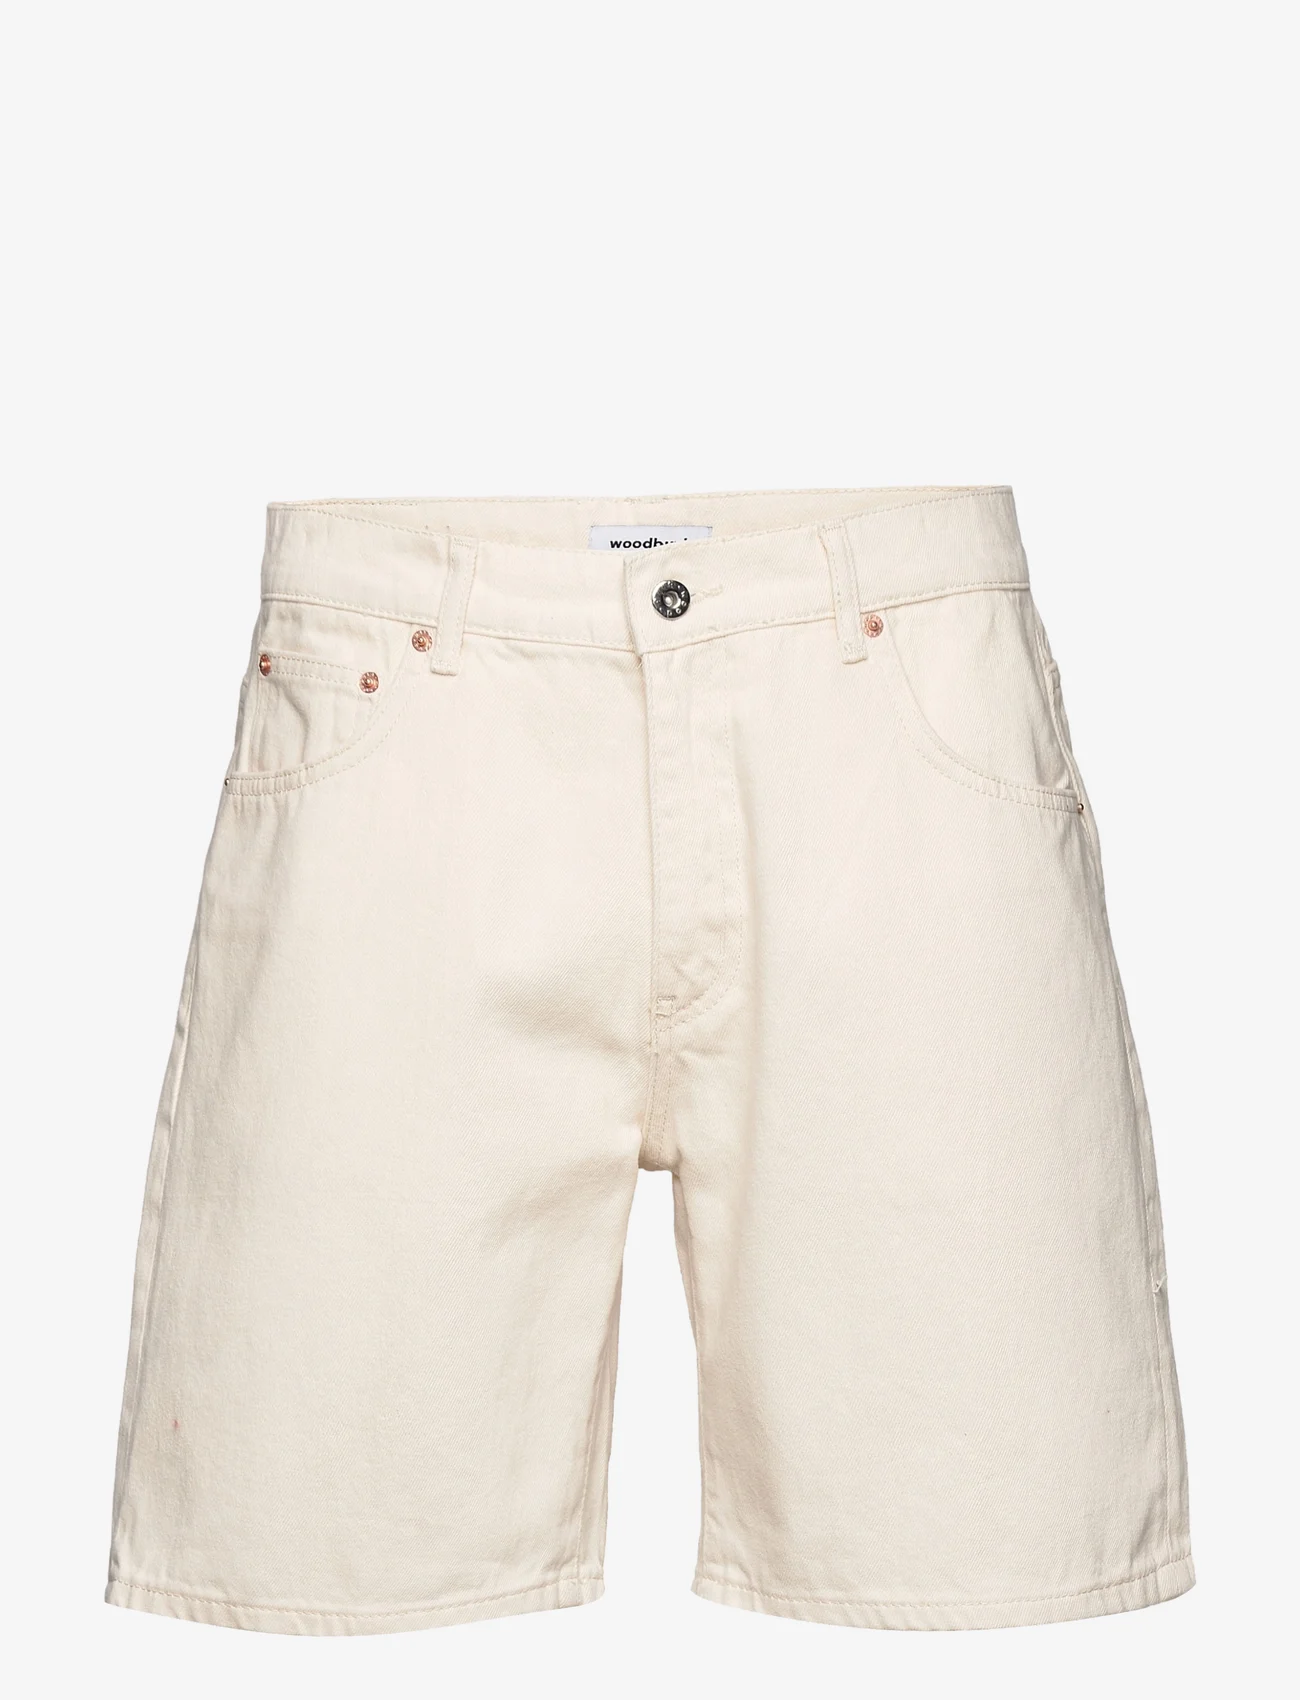 Woodbird - Doc Twill Shorts - jeans shorts - off white - 0